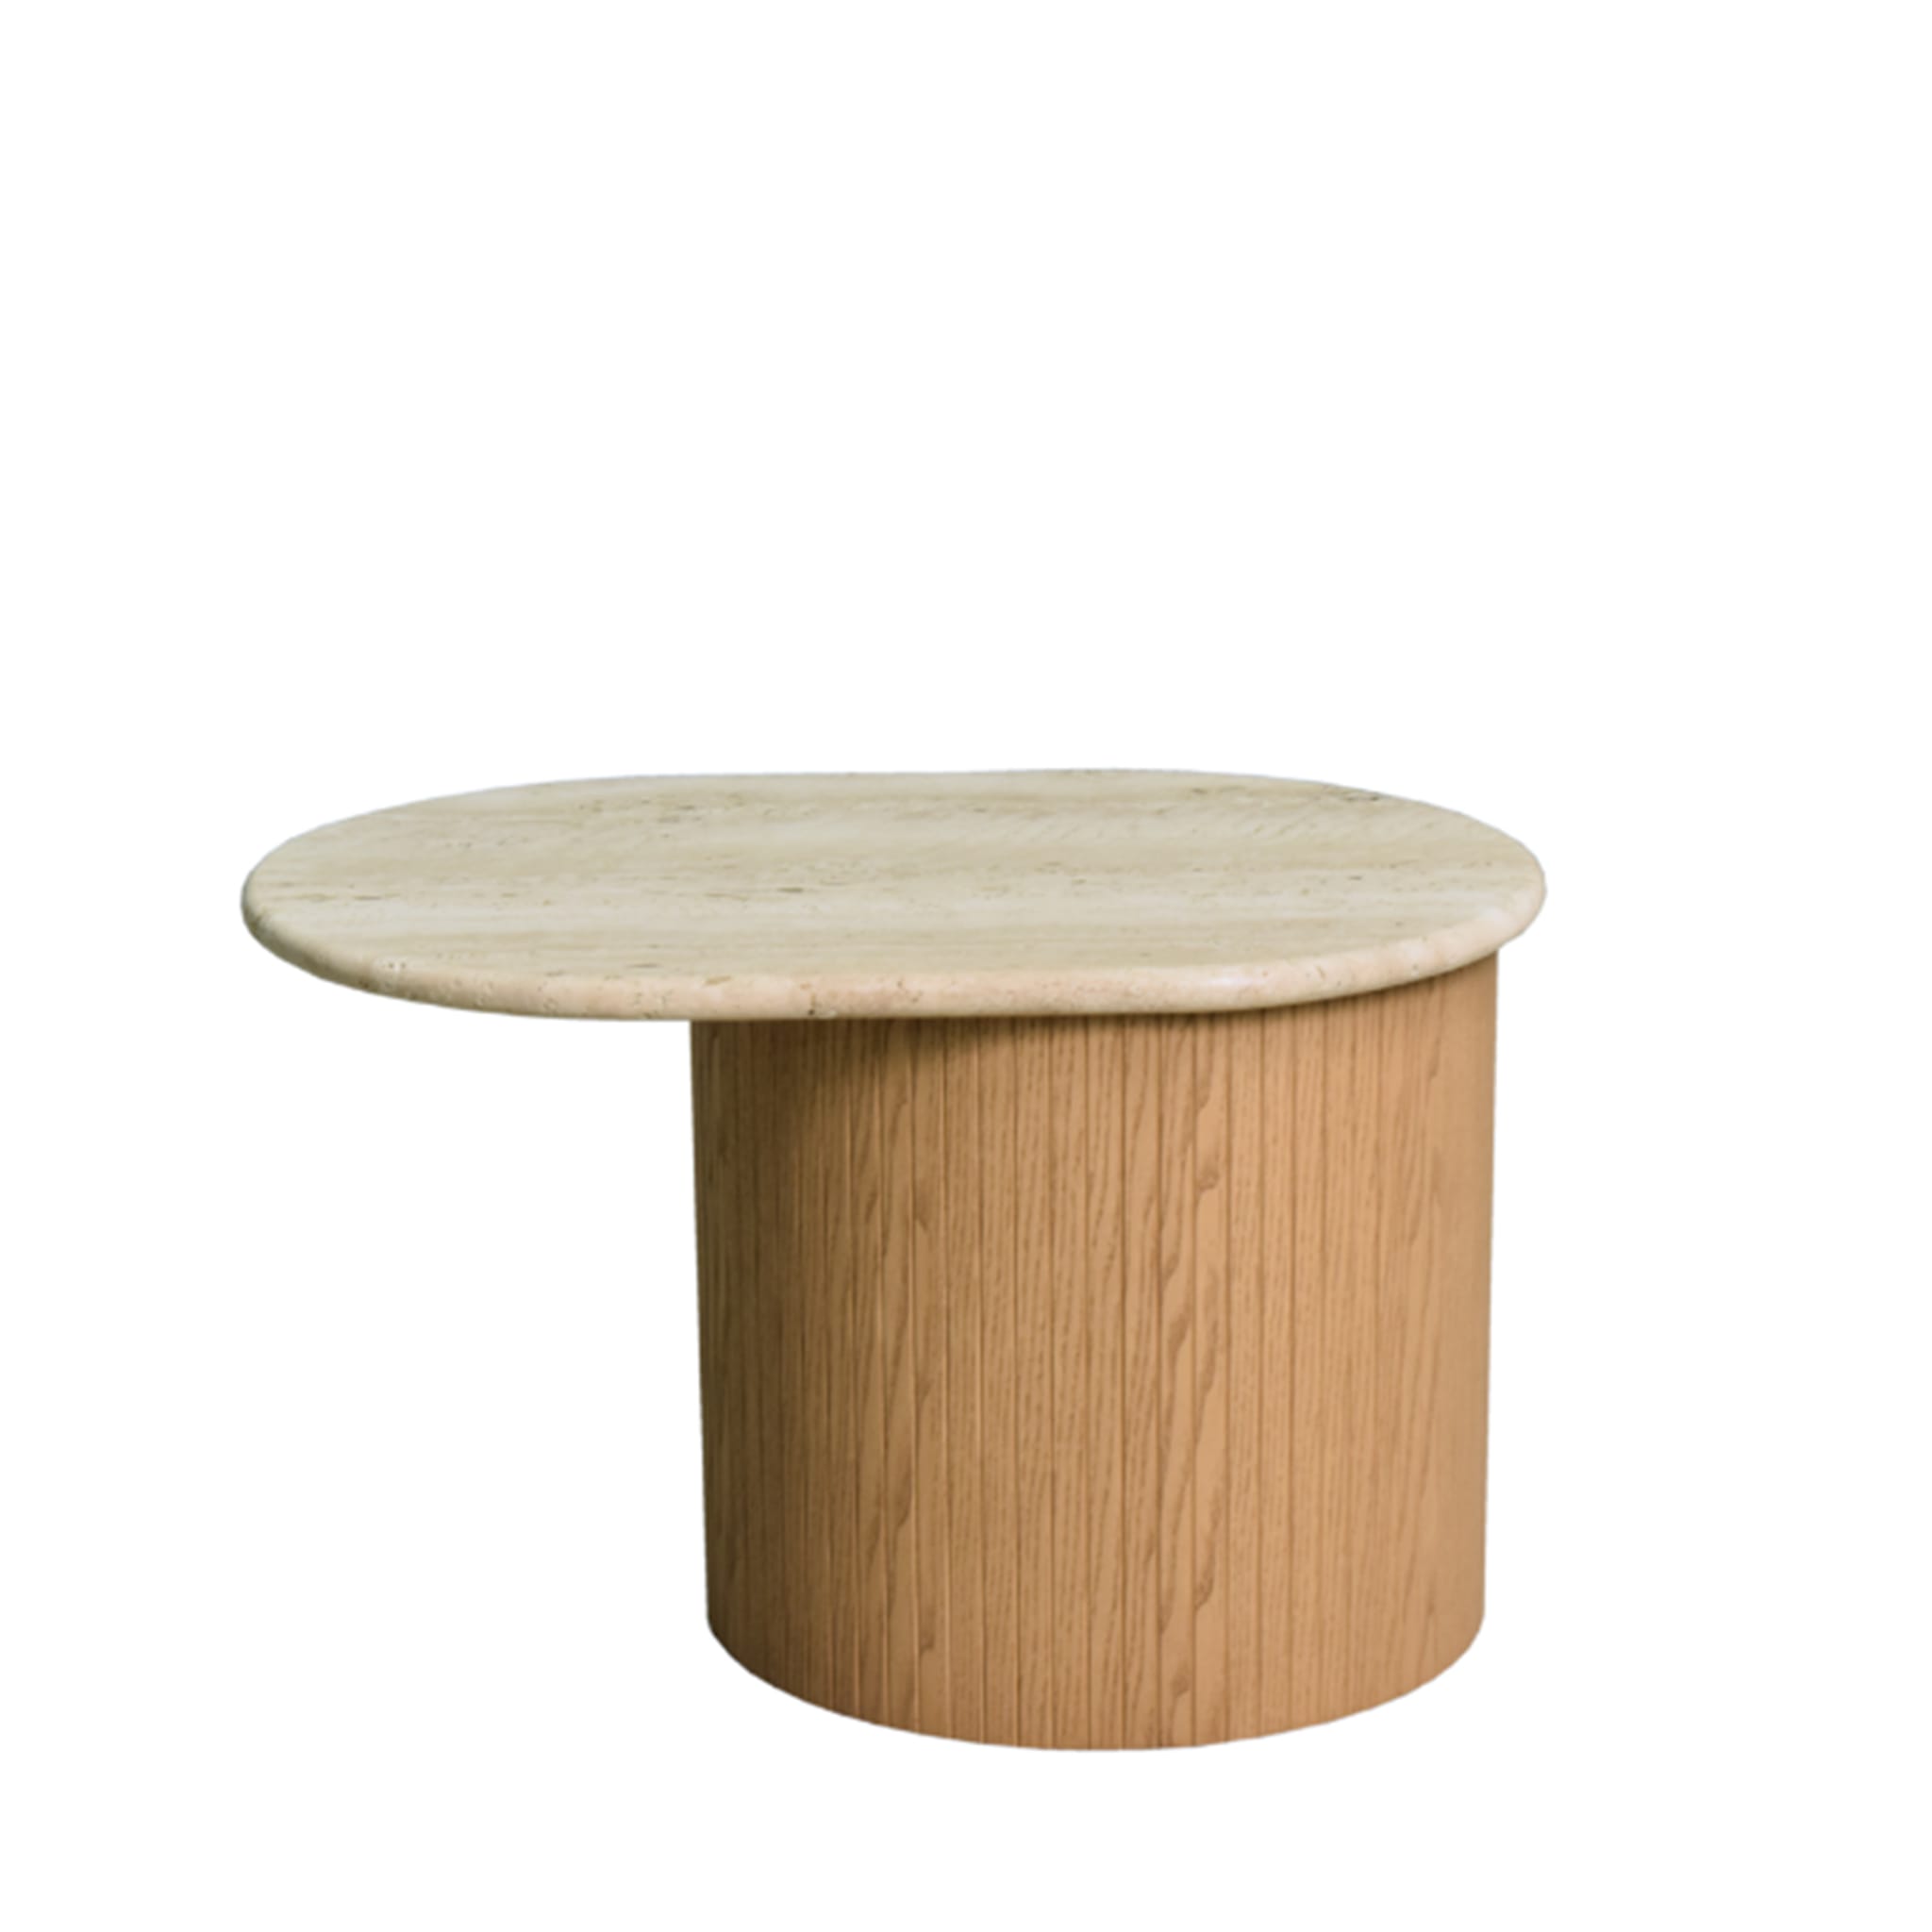 Bitta Side Table with Travertine Marble Top #2 by Libero Rutilo - Alternative view 1